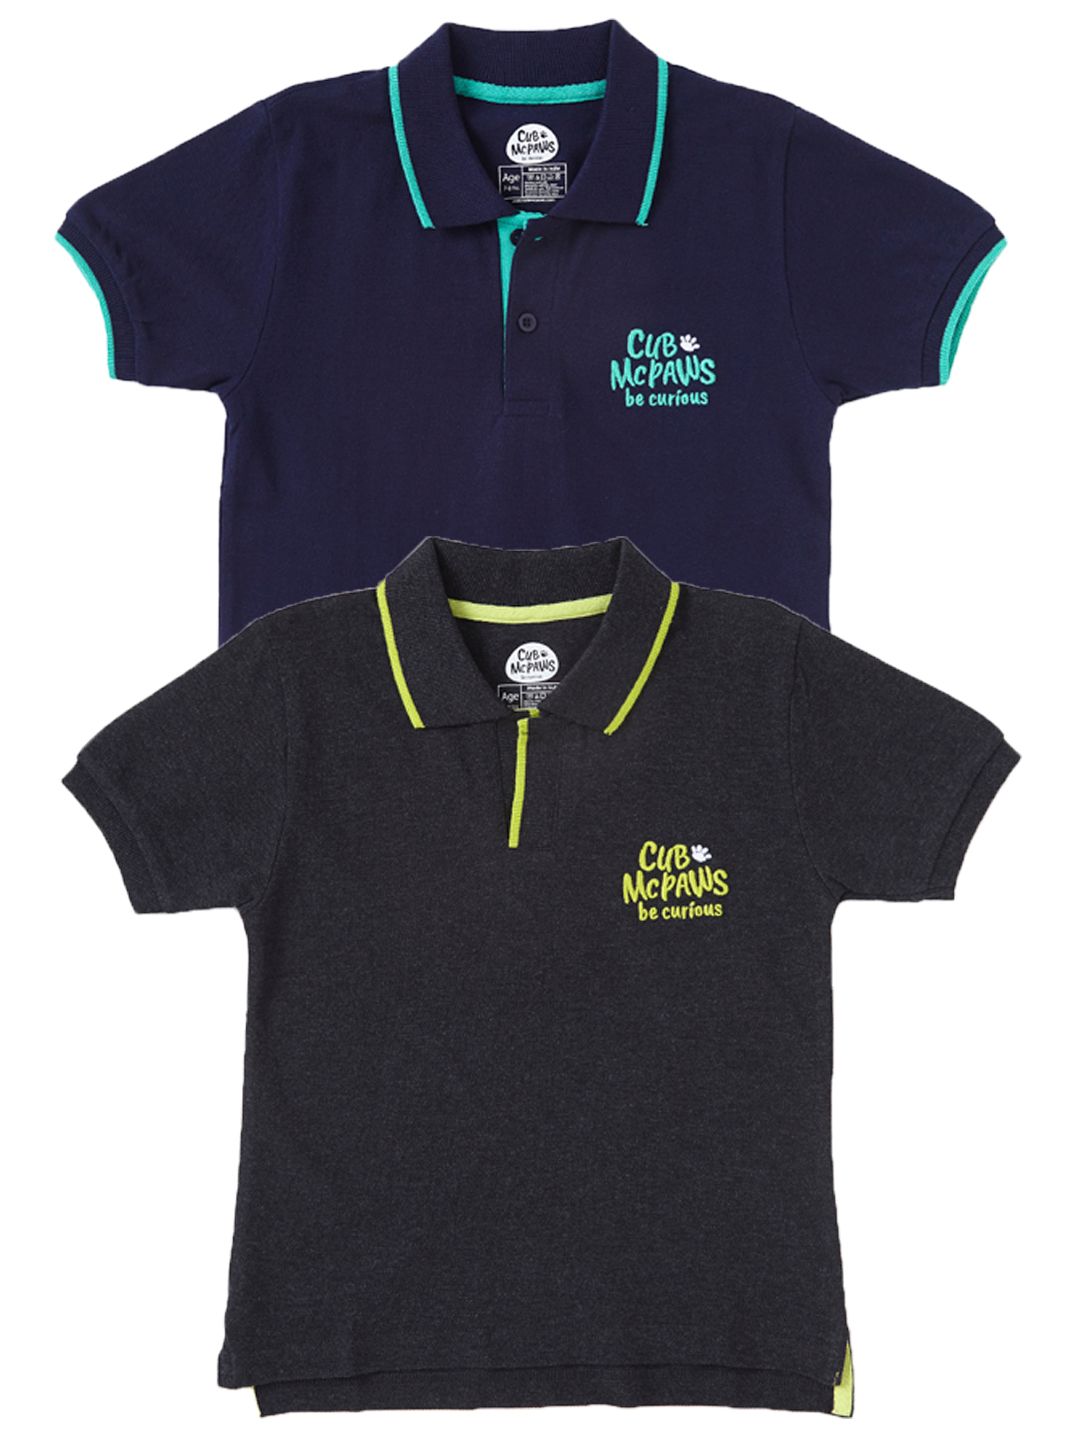 Boys Pack of 2 Classic Polo T-Shirts - Navy & Black